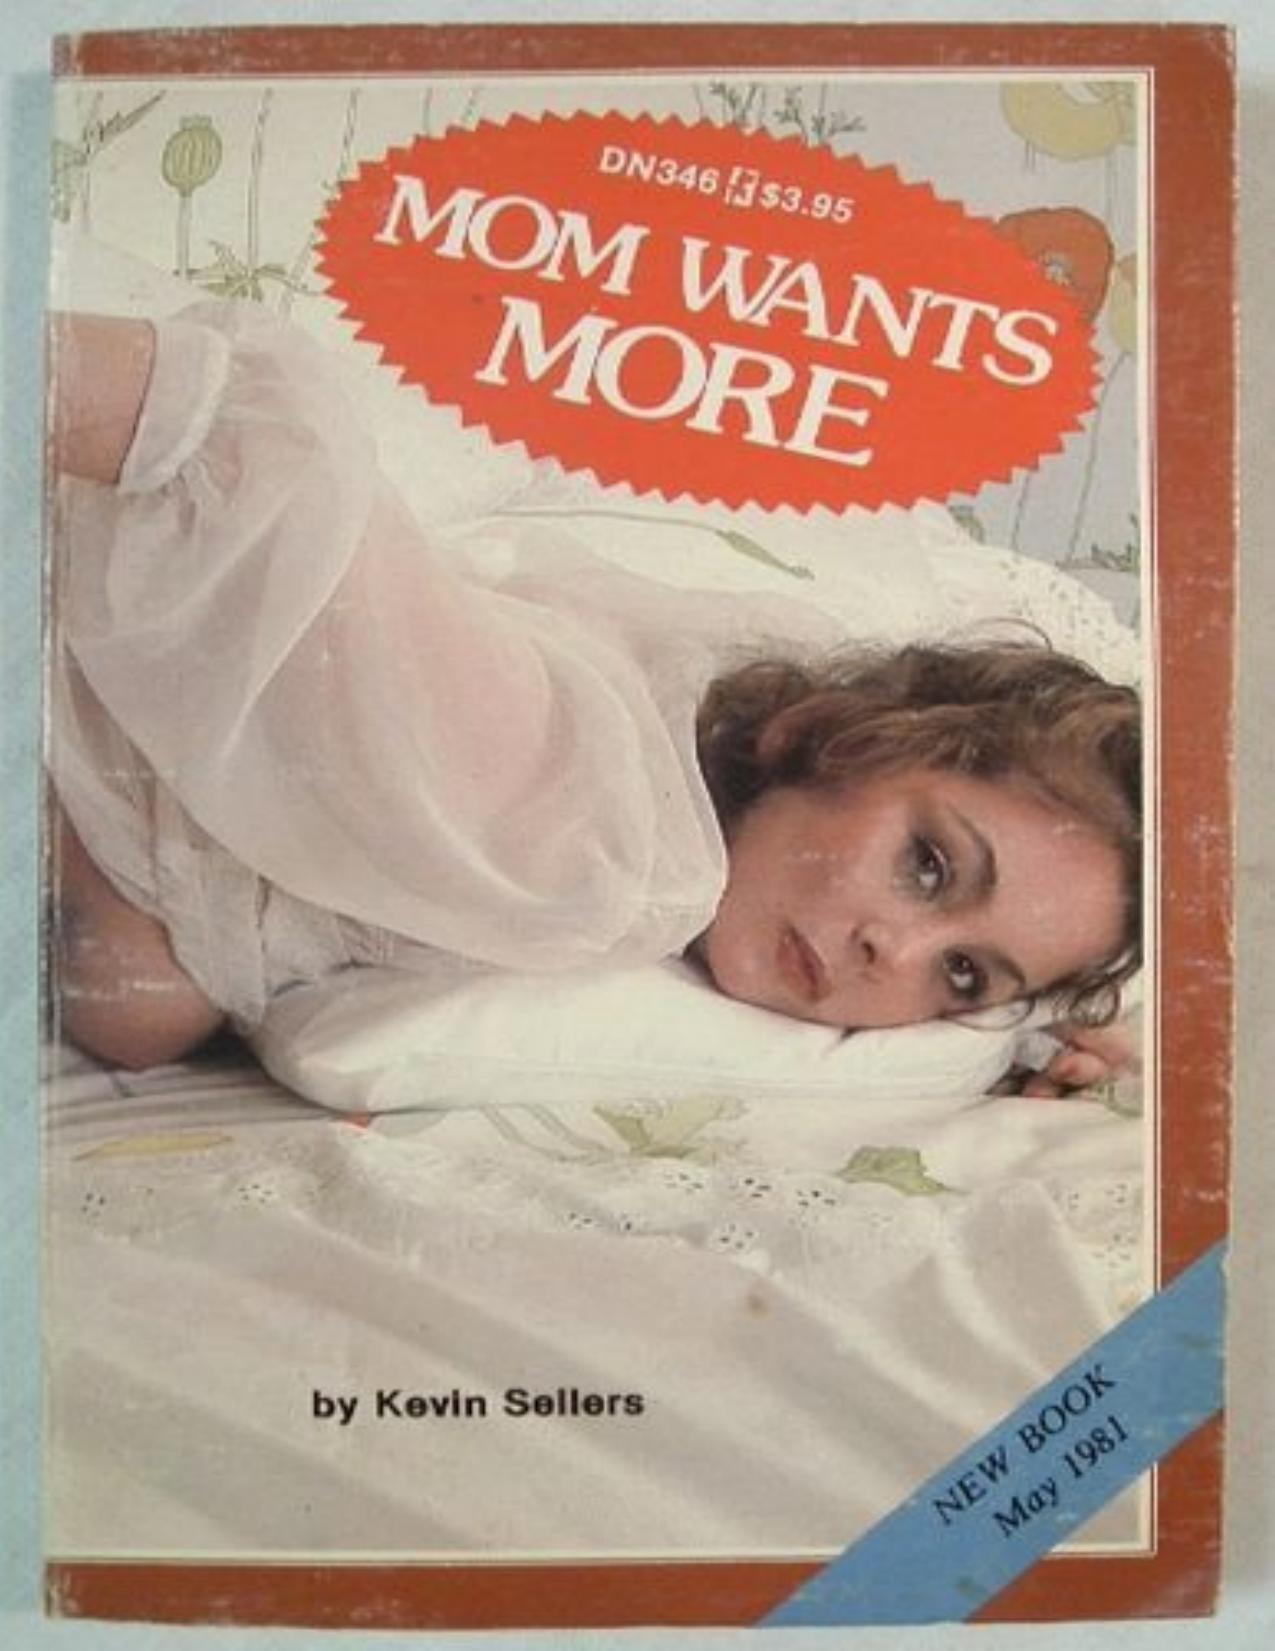 Mom Wants More by Kevin Sellers